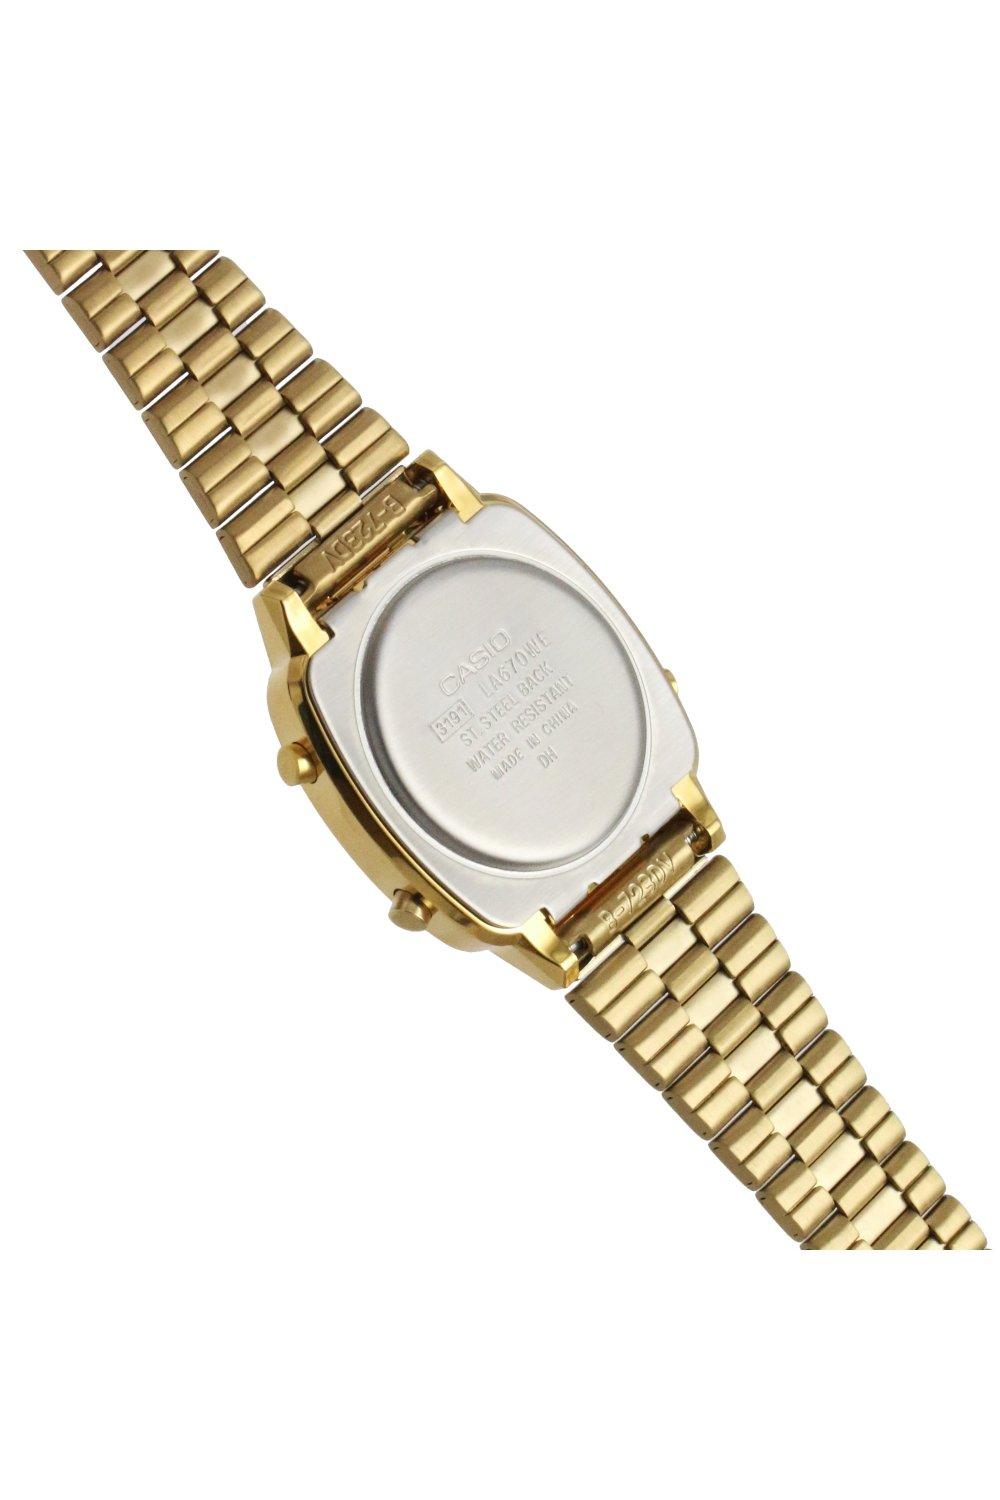 Watches, Classic Collection Gold Plated Stainless Steel Watch - La670Wega- 9Ef